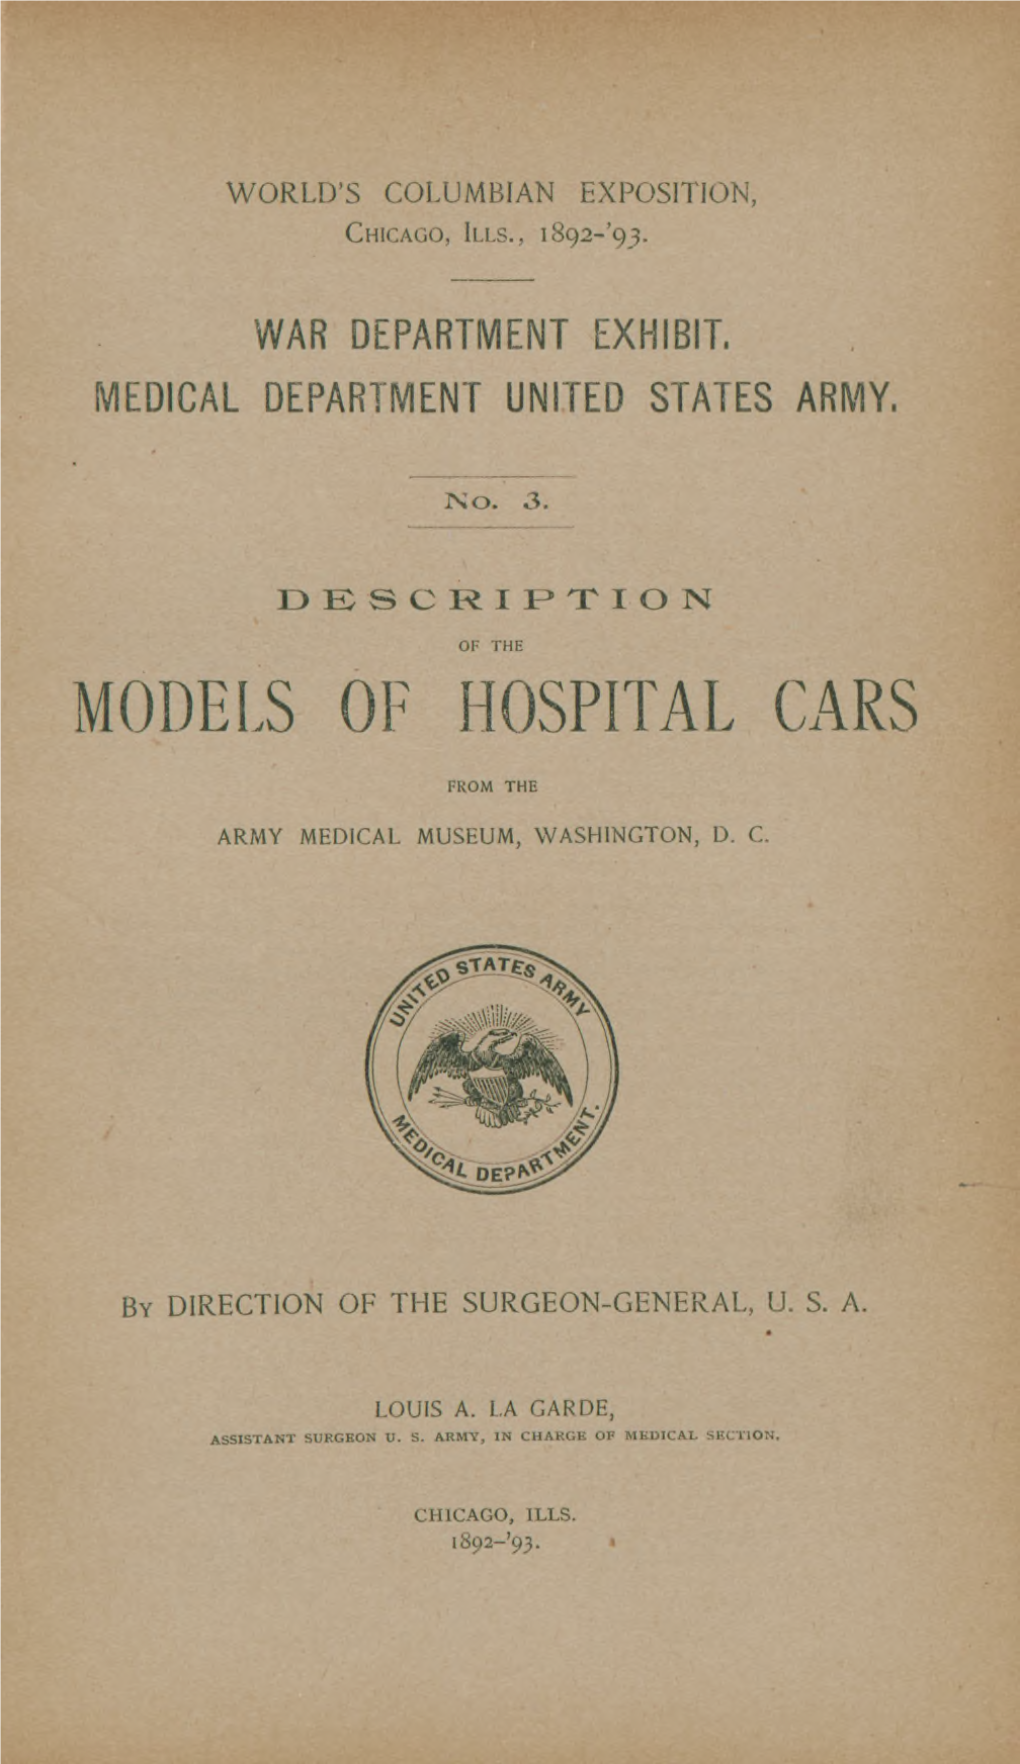 Description of the Models of Hospital Cars From